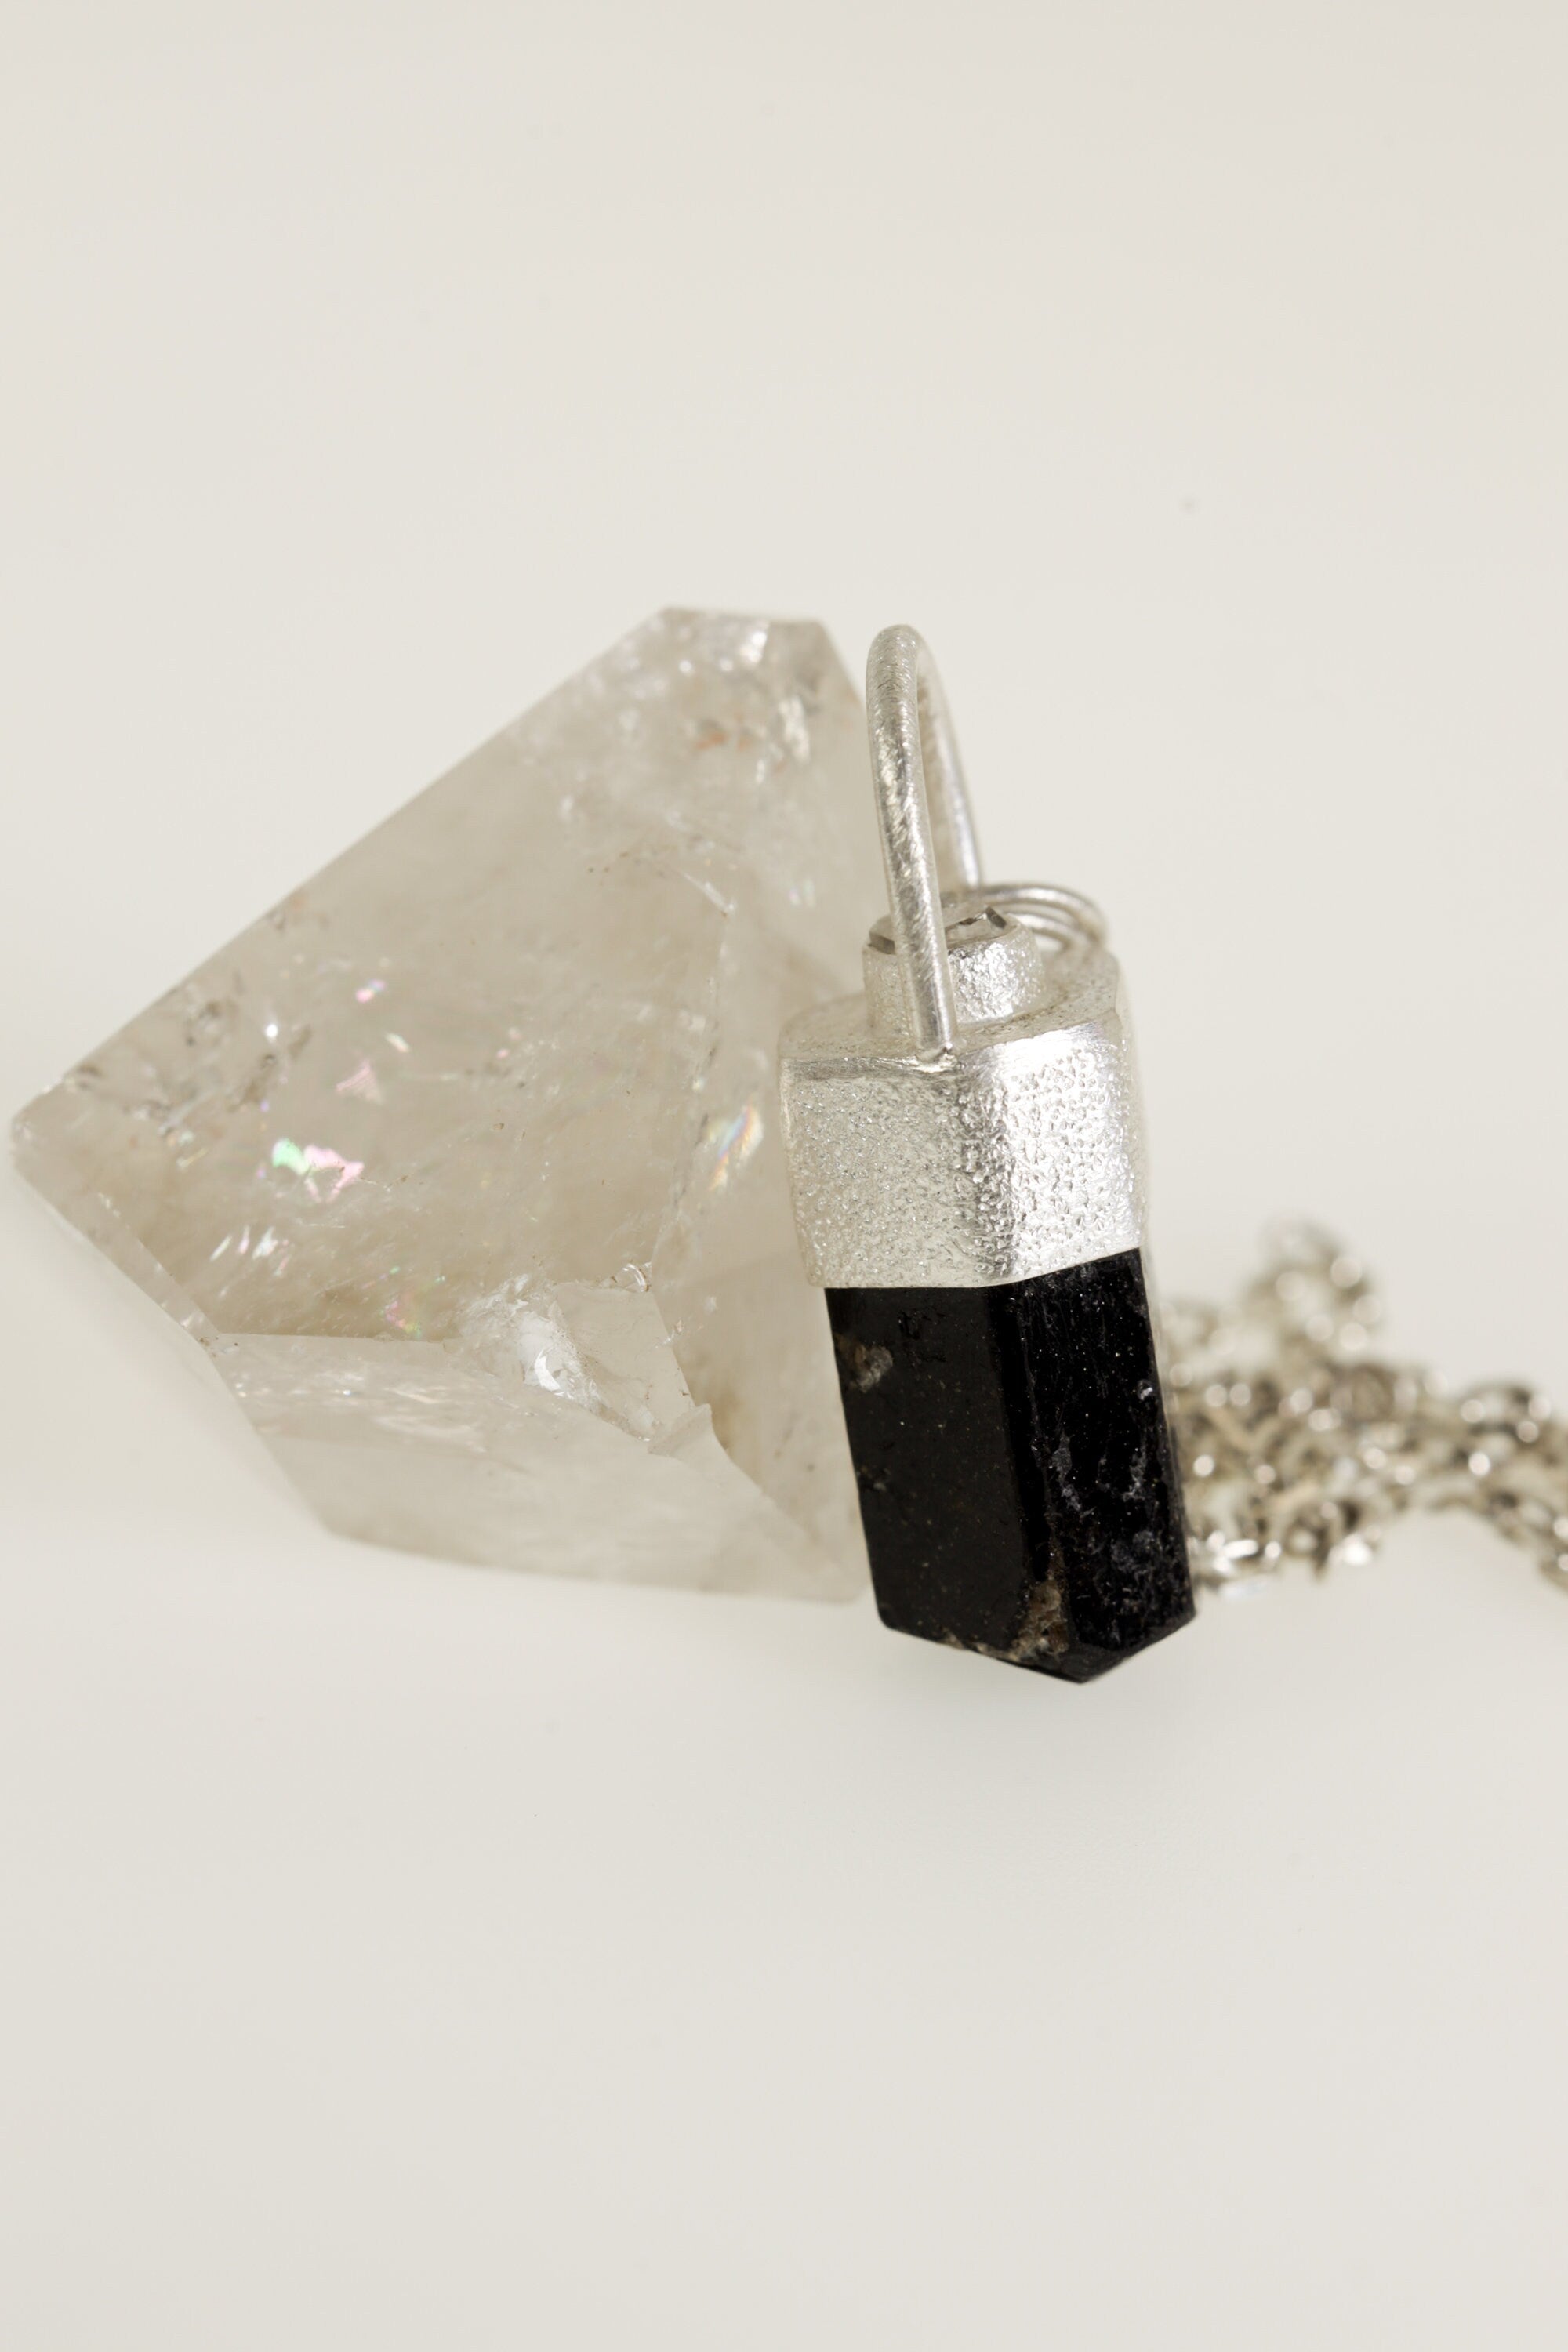 Earthen Brilliance: Sterling Silver Pendant with Himalayan Terminated Brown Dravite Tourmaline and Diamond - Sand Texture Finish - NO/02